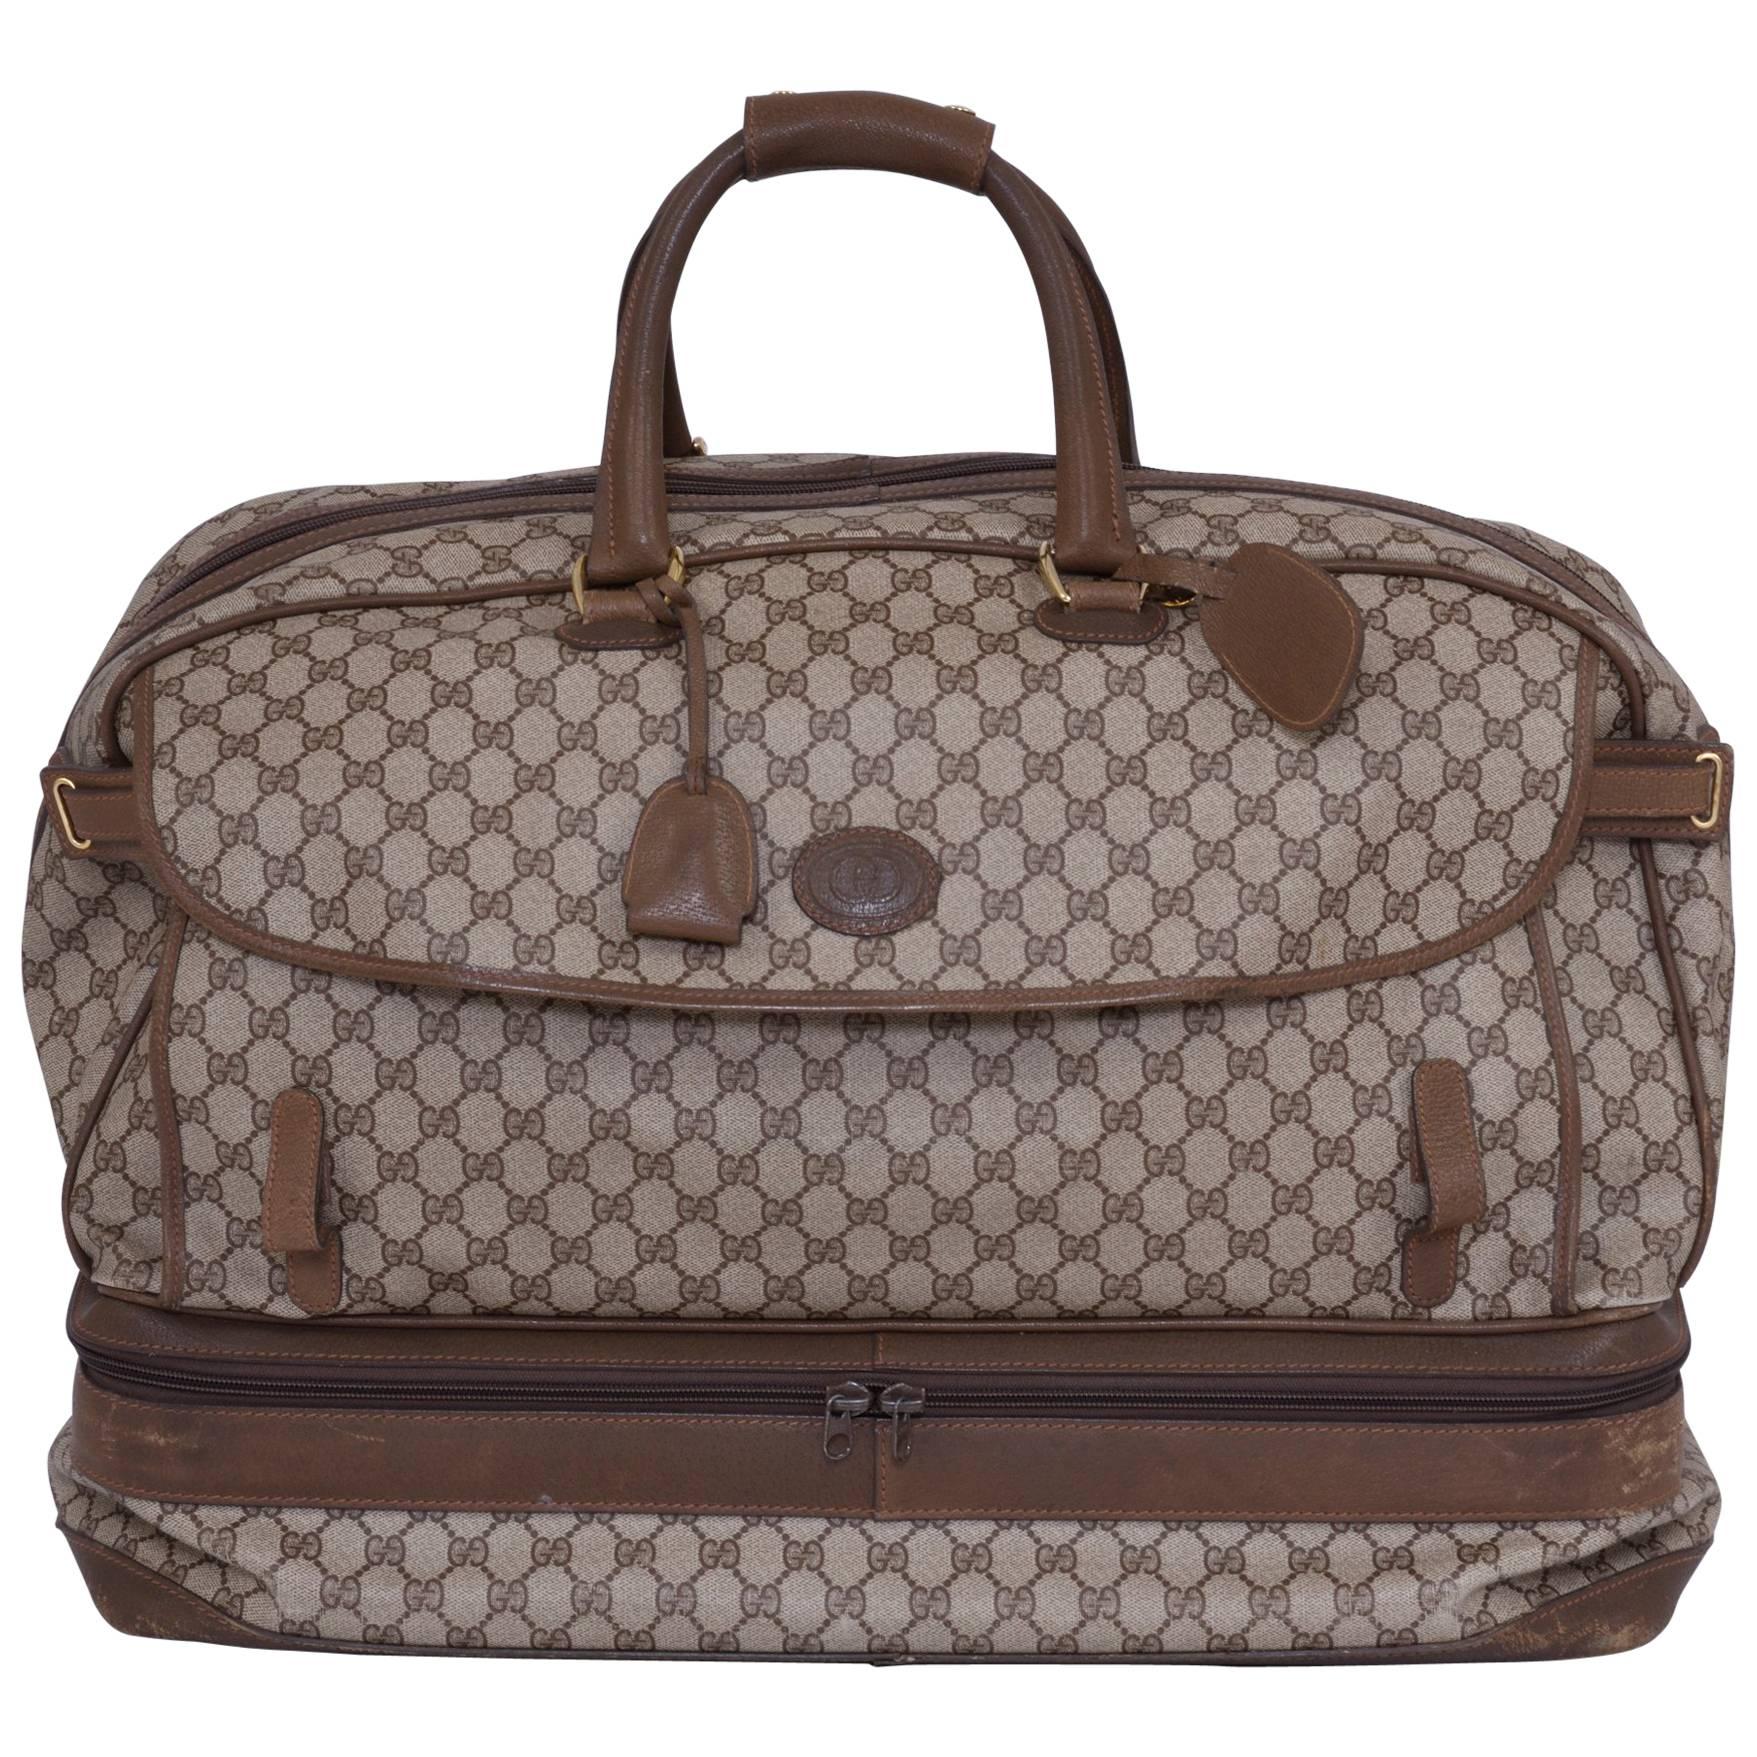 1980s GUCCI GG Monogram Brown Canvas Luggage Bag For Sale